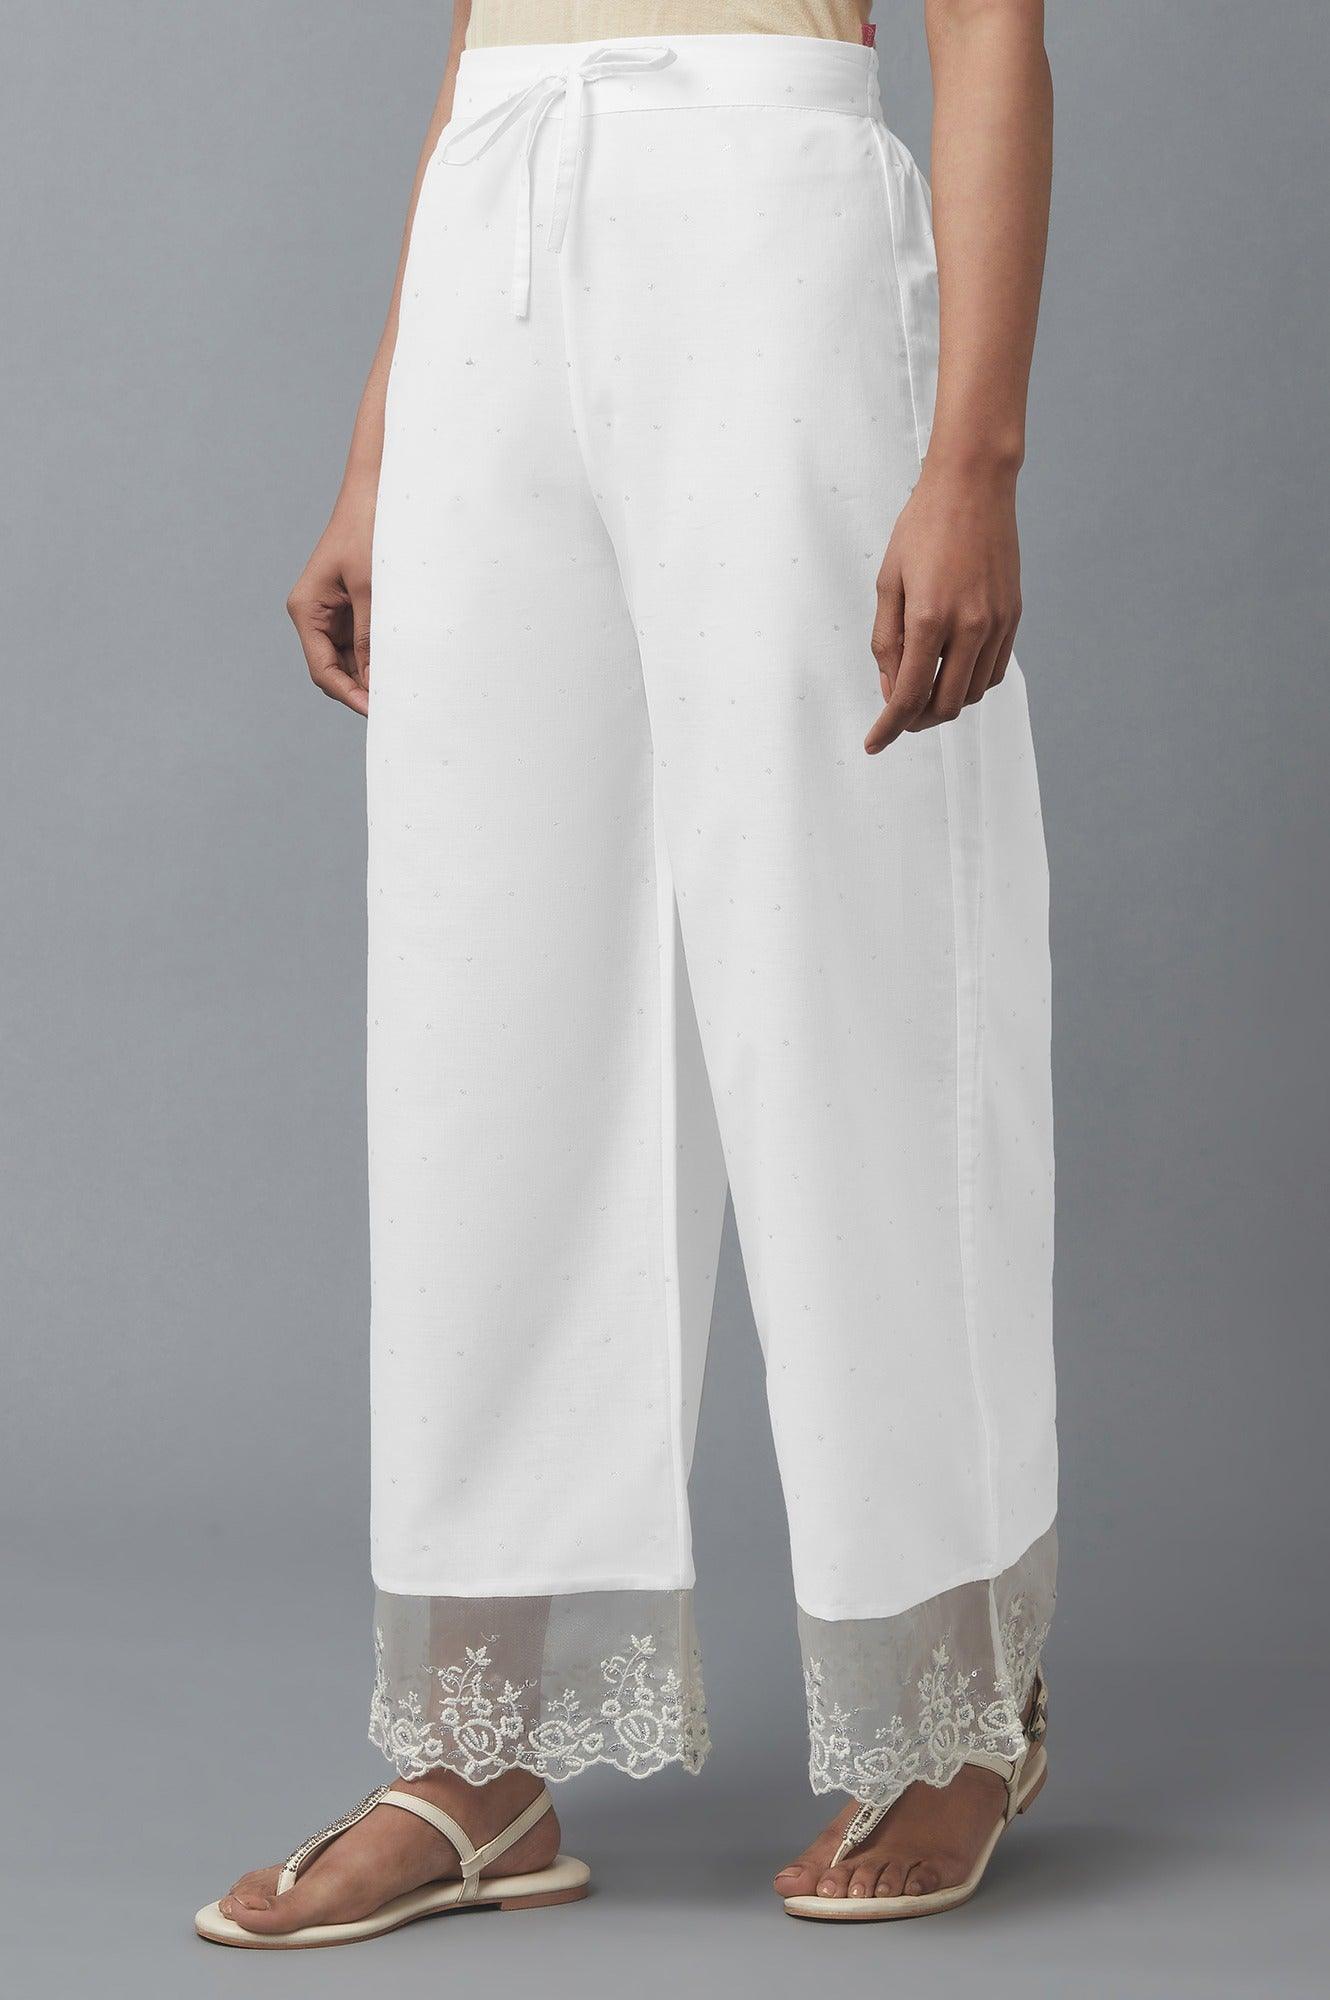 Ecru Parallel Pants with Embroidered Organza Panel - wforwoman